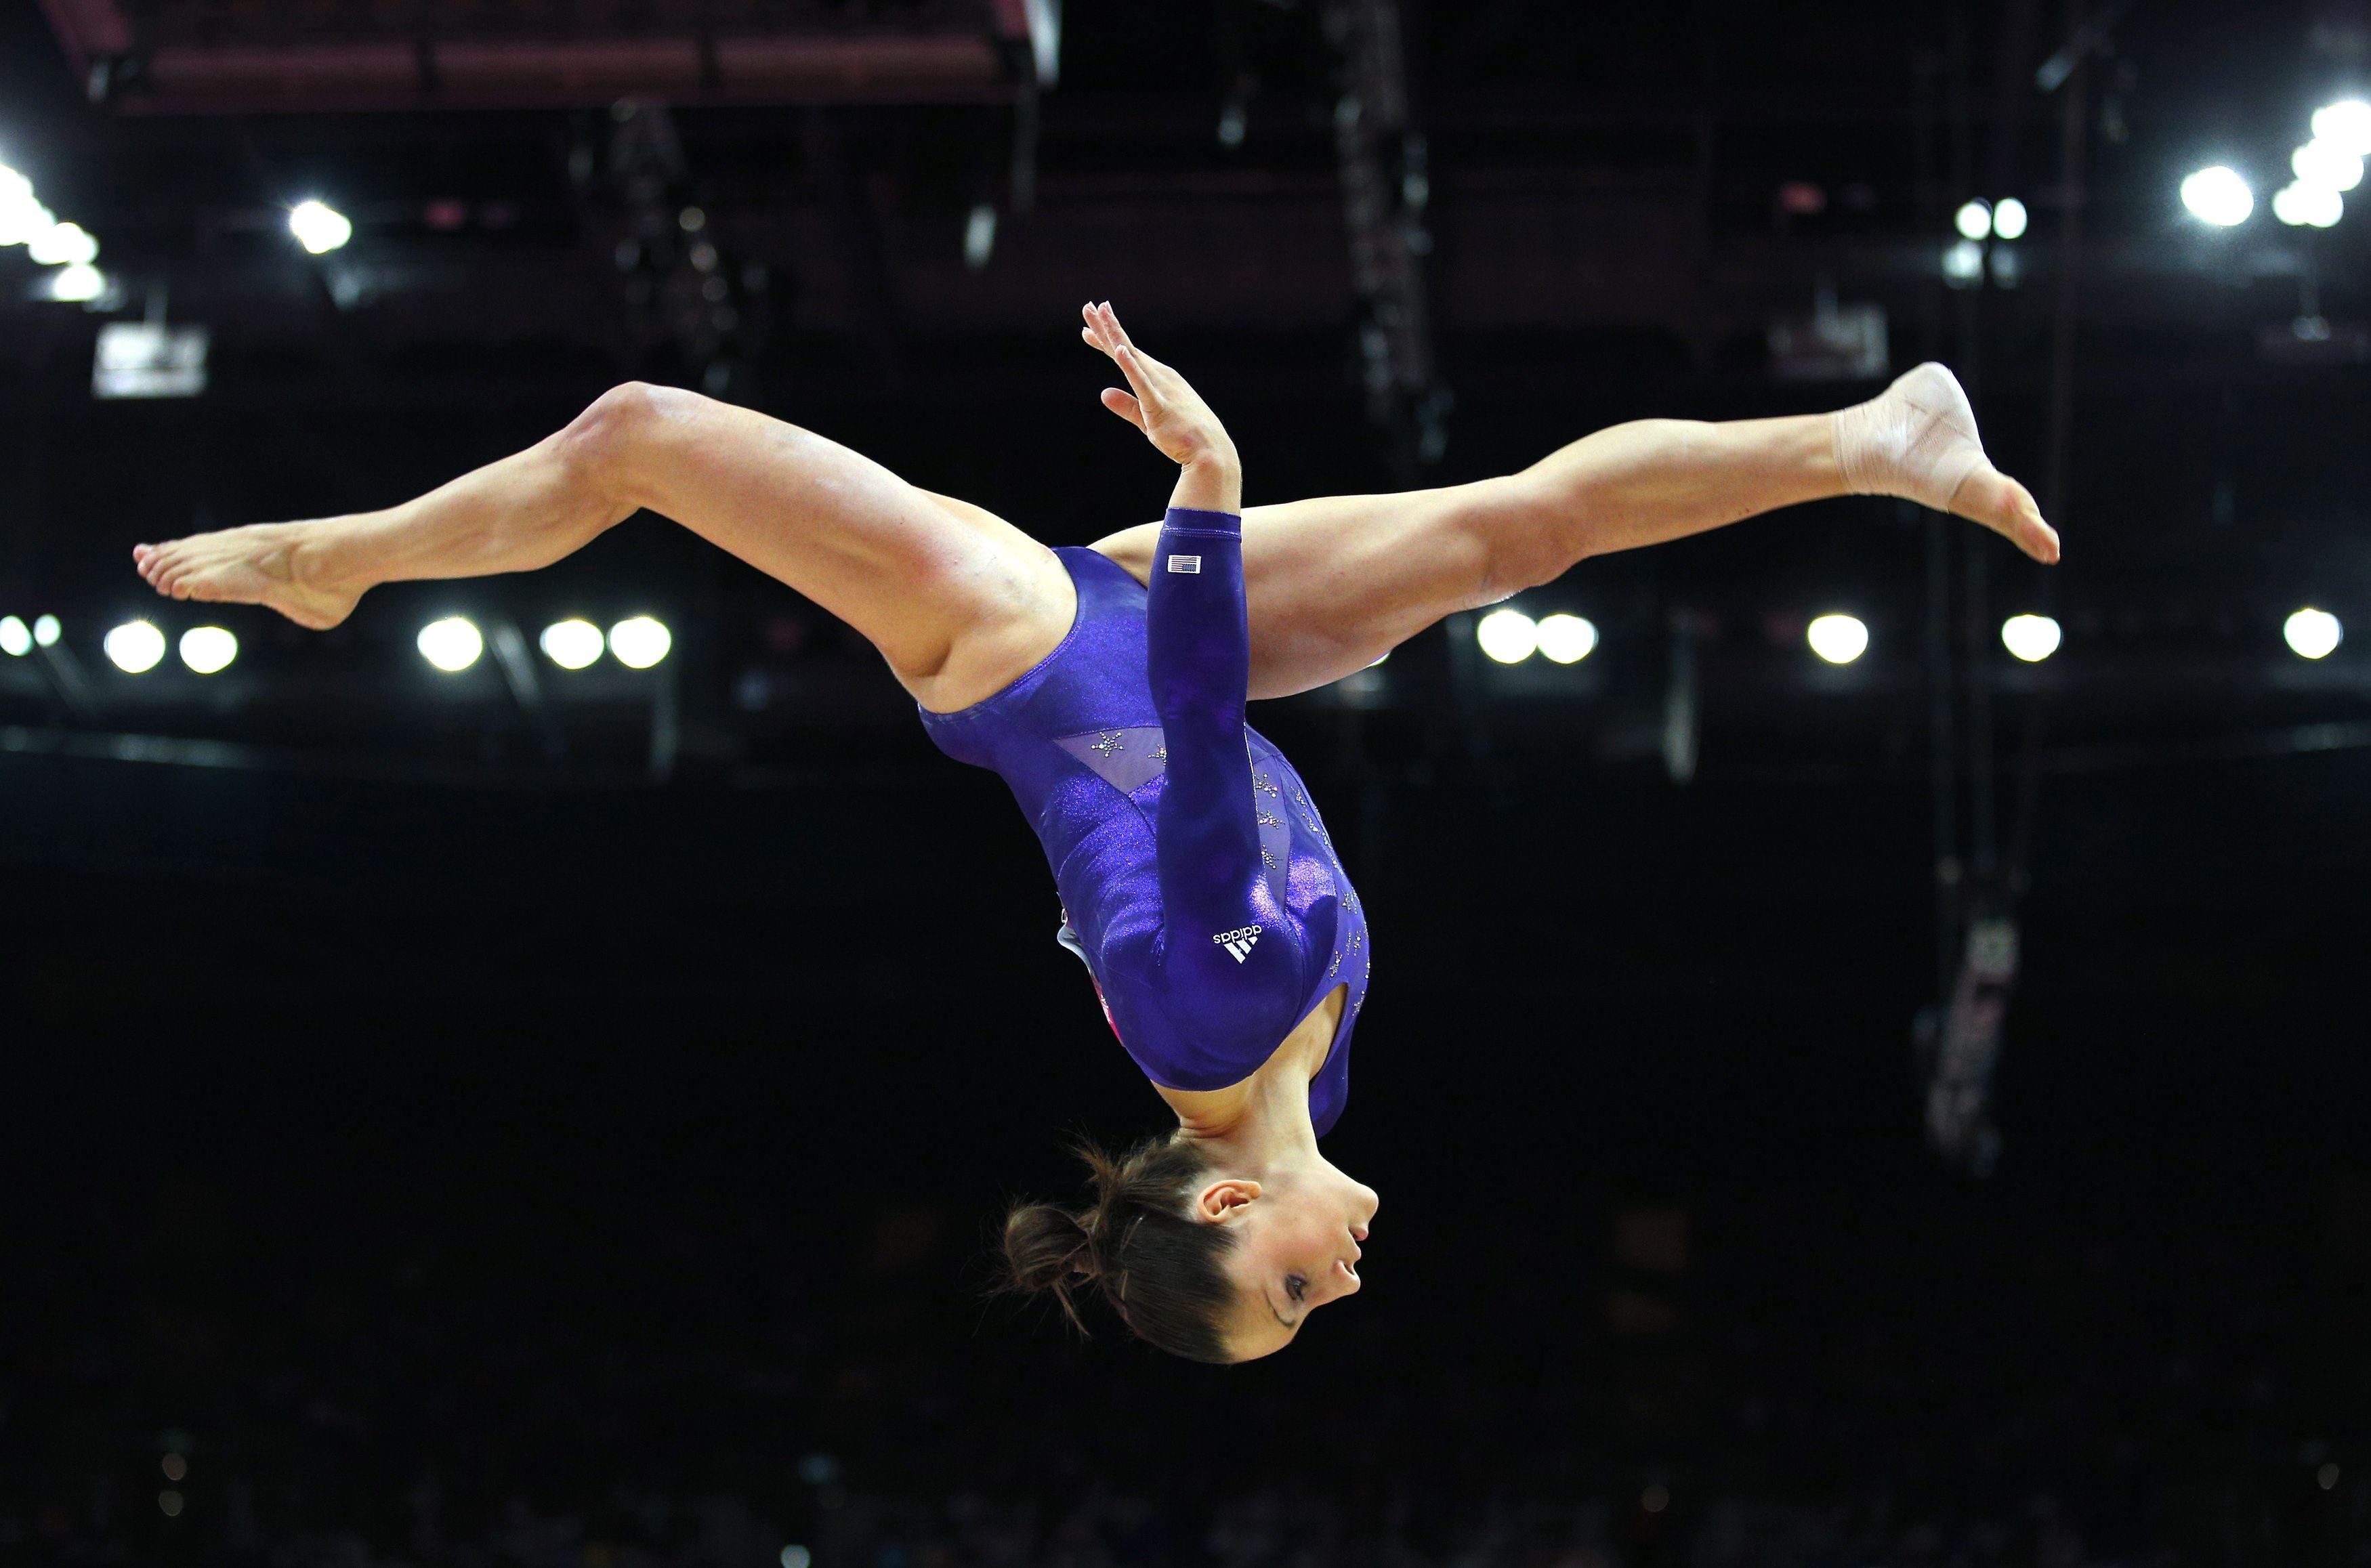 Gymnastics Full HD Wallpaper and Background Imagex2315